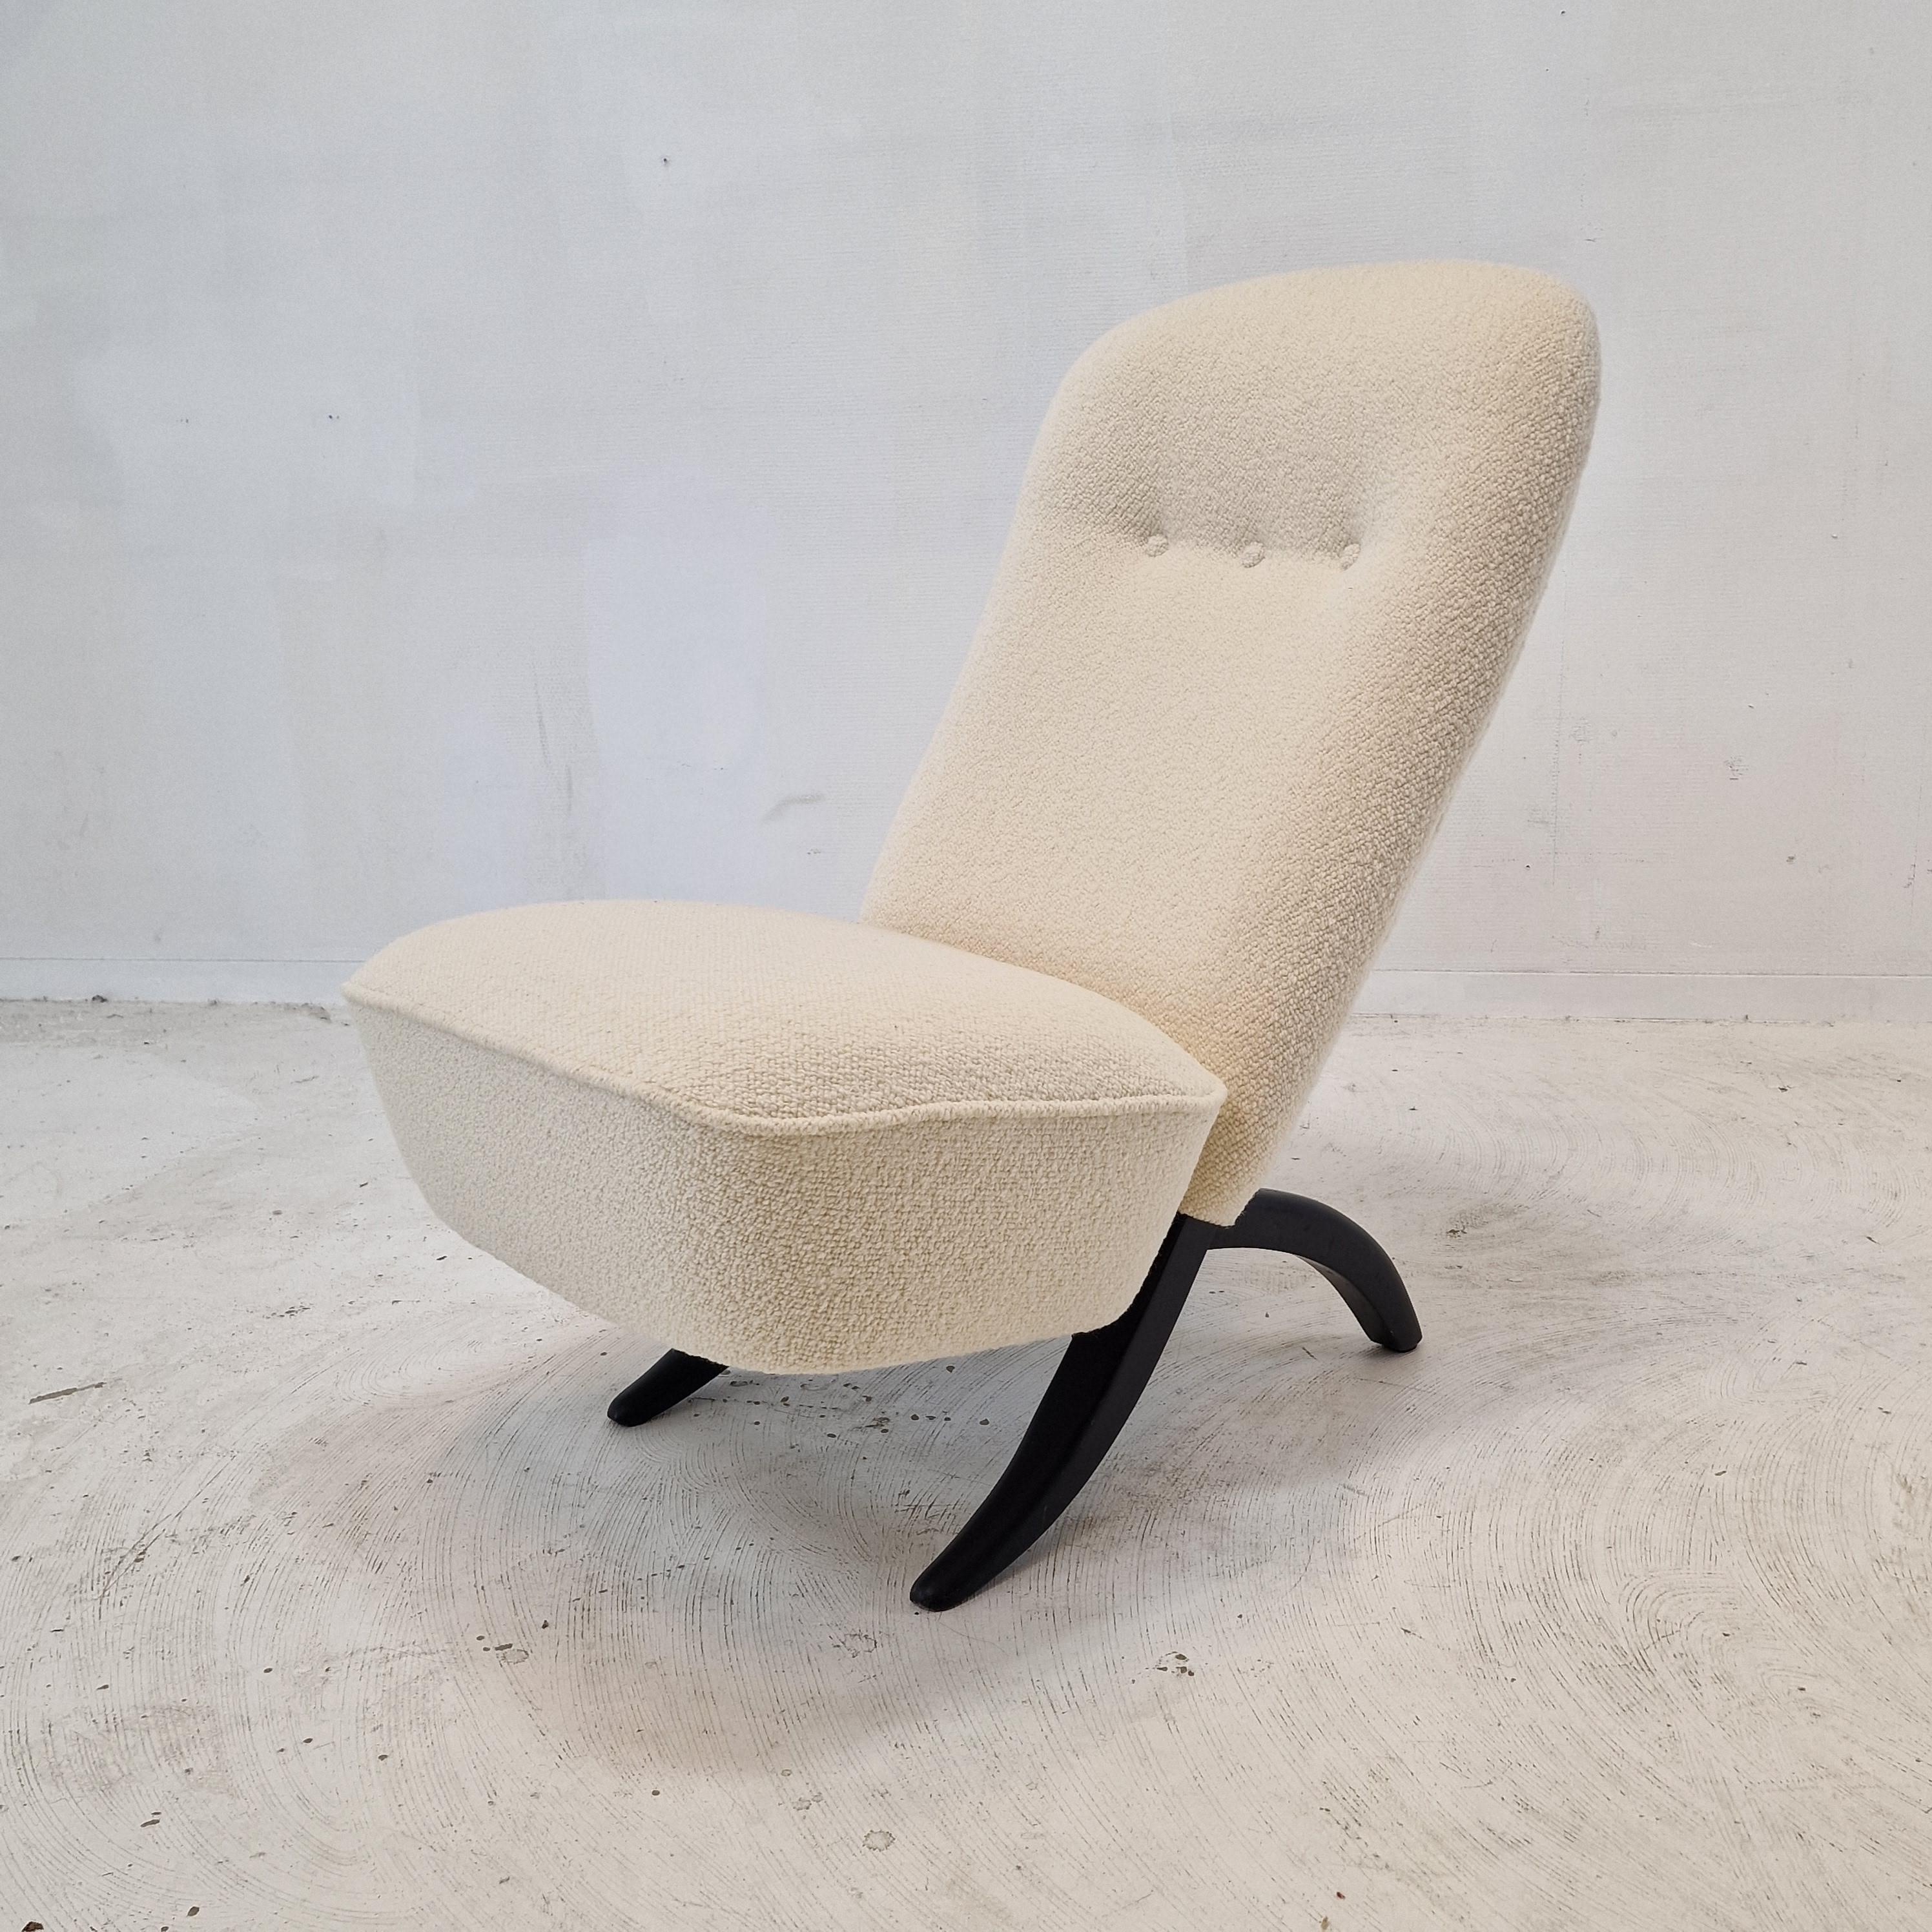 Stunning Mid-Century Modern Congo Chair, designed by Theo Ruth for Artifort.
Iconic Dutch design from the 50s.

The back and the seater are 2 separate pieces that easily fits together and makes it a unique chair.

The chair is restored with new